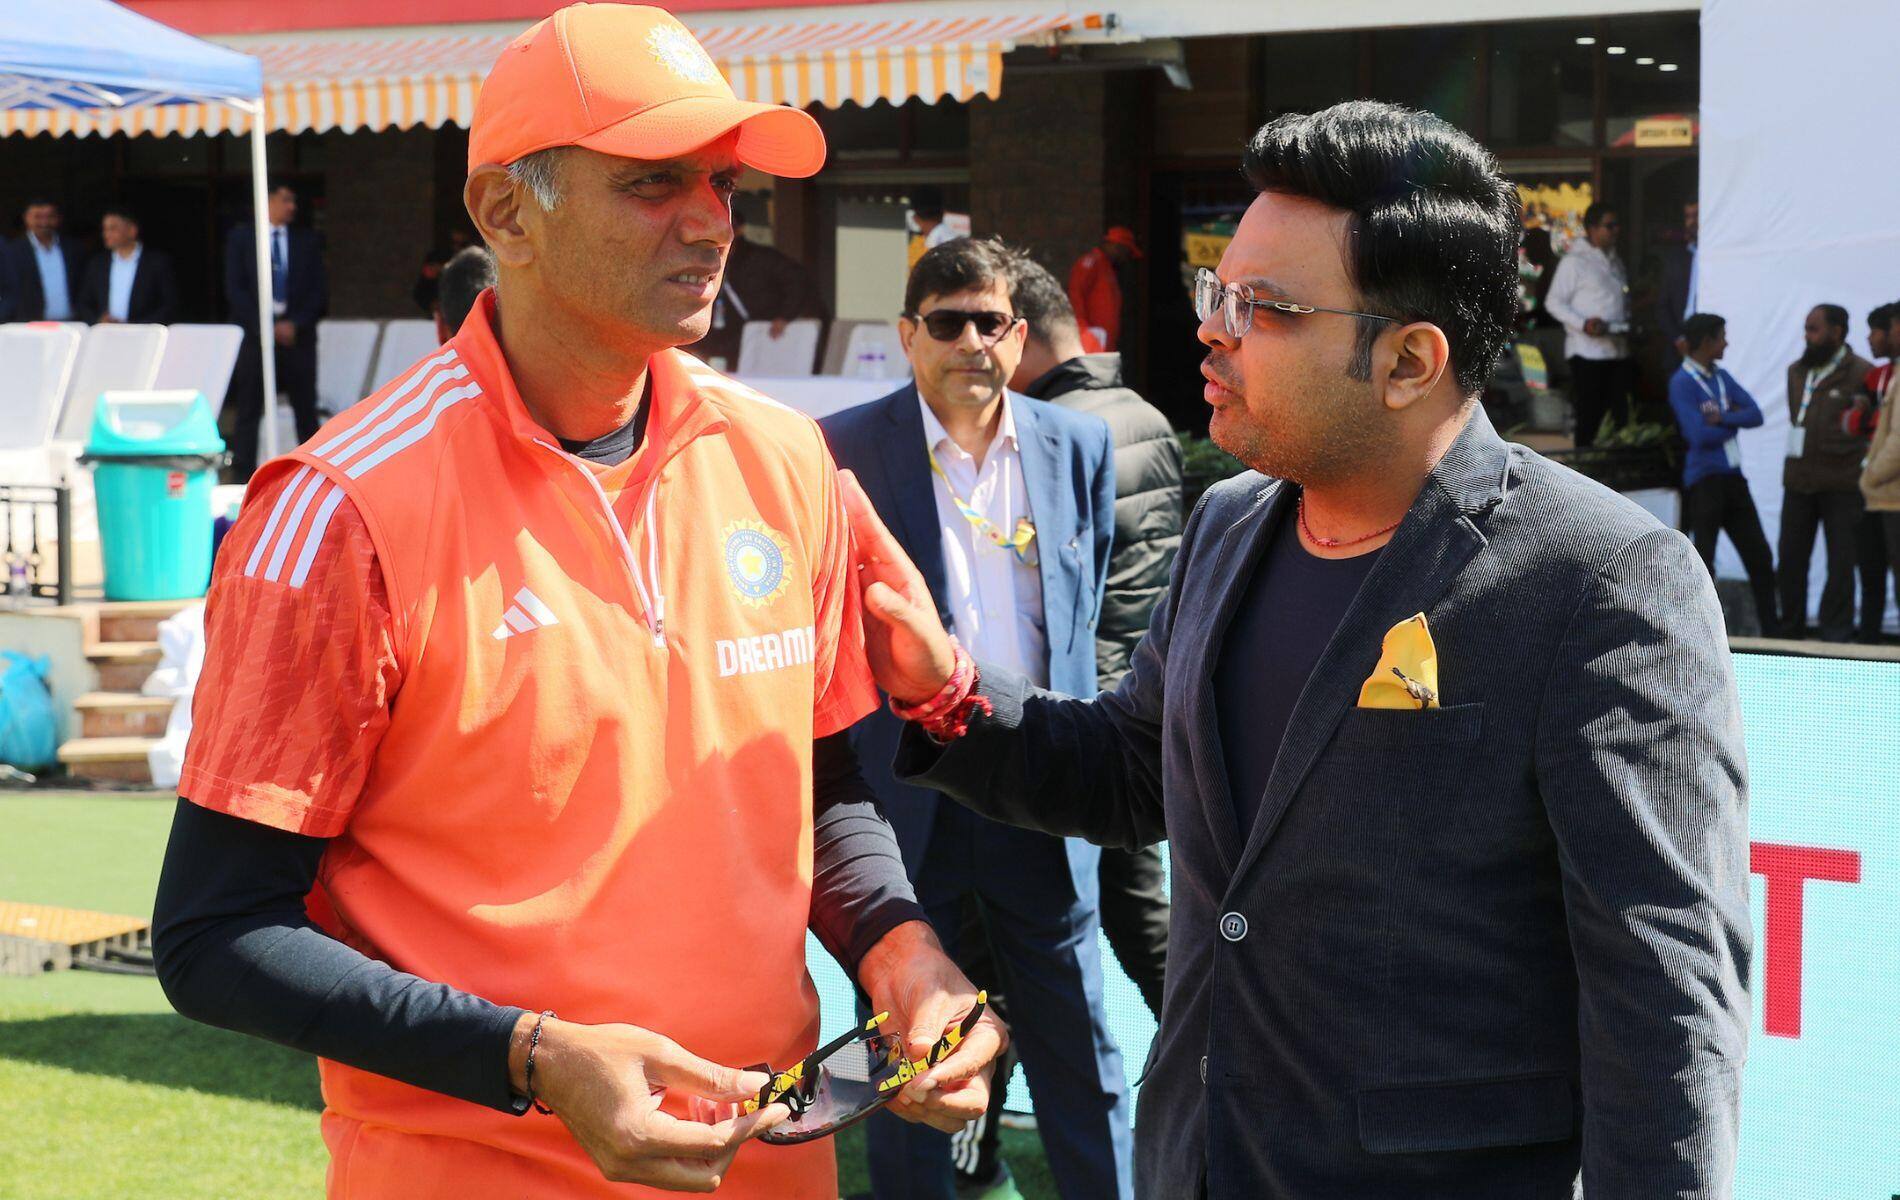 Current Indian coach Rahul Dravid's contract ends in June (X)